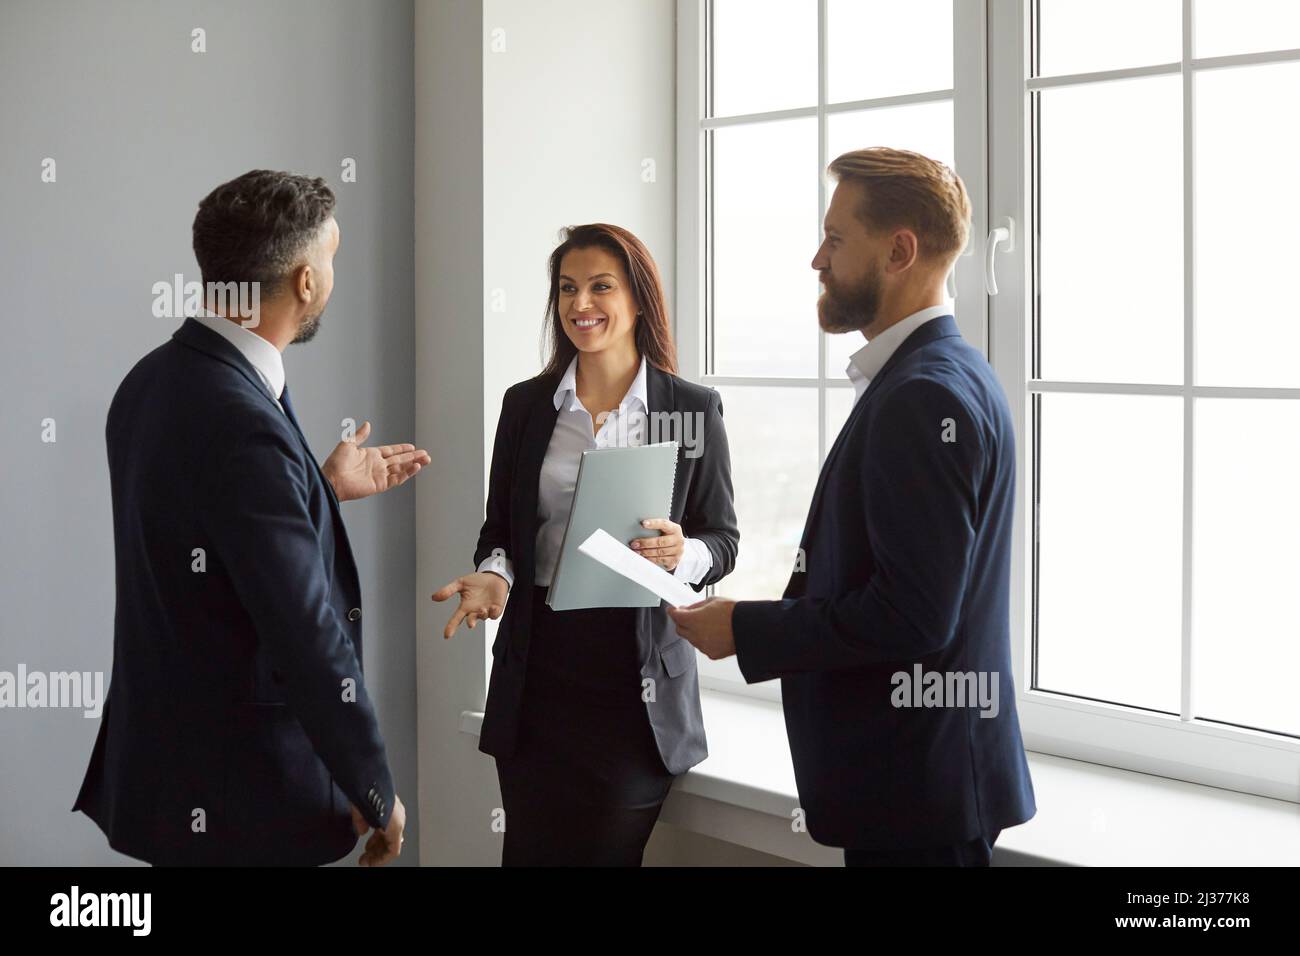 Smiling business people discuss work, project strategy and exchange ideas together. Stock Photo